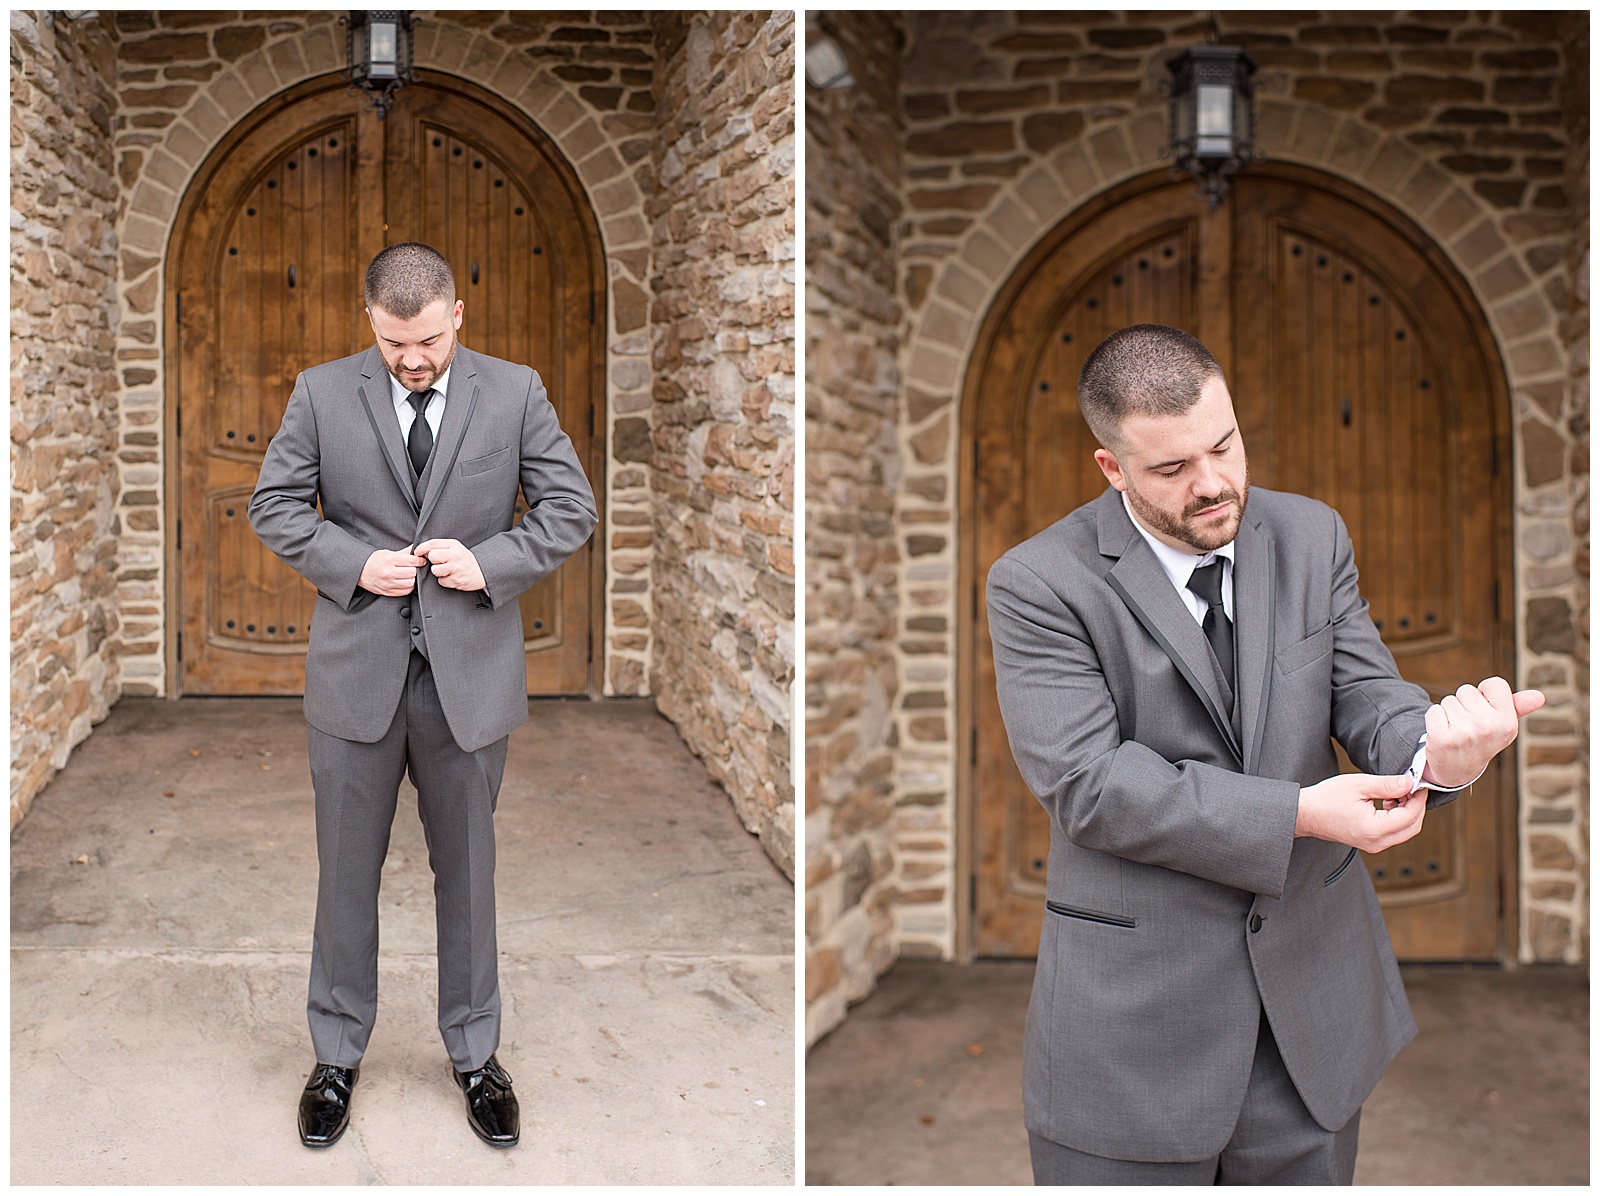 groom looking down and buttoning up his gray suit coat in front of large wooden arched door